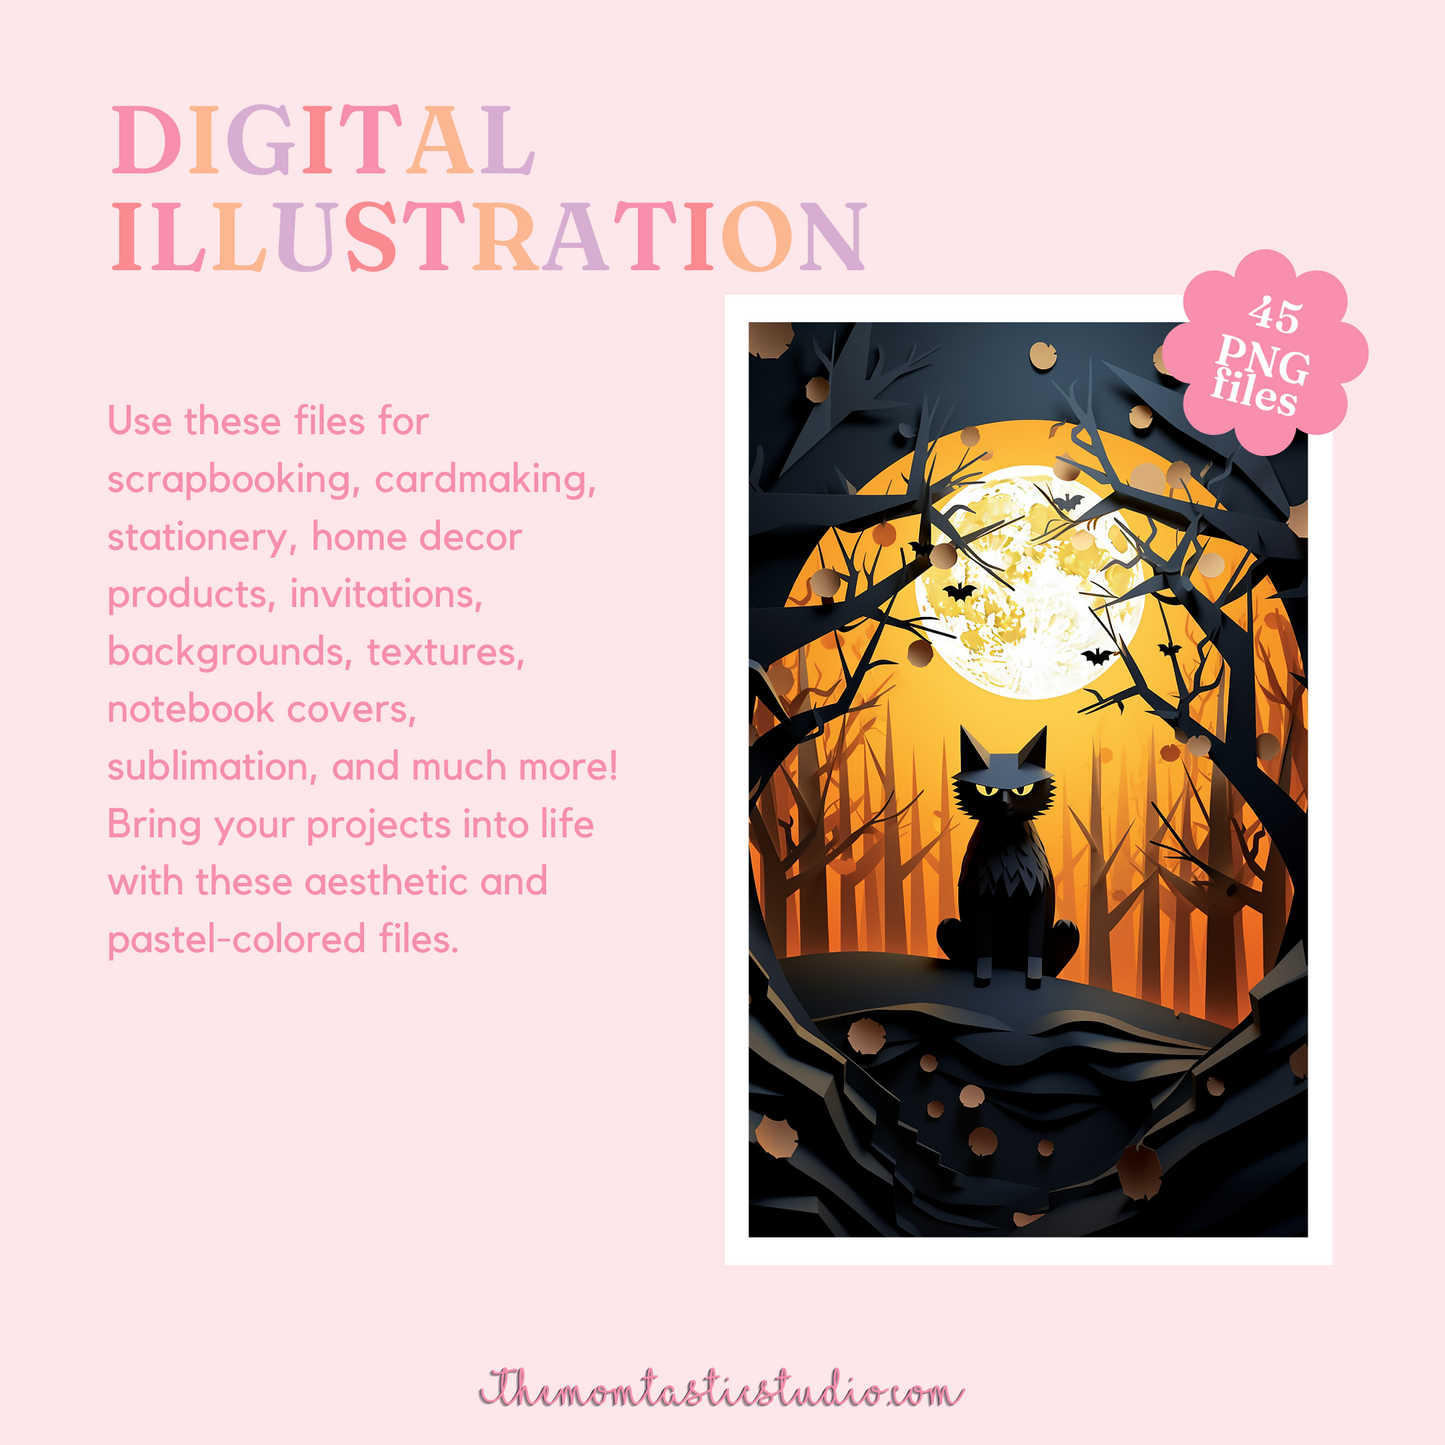 Tricks, Treats and Tales - Halloween Digital Illustration | Commercial Use | Spooky | For Notebooks, Chipbags, Sublimation